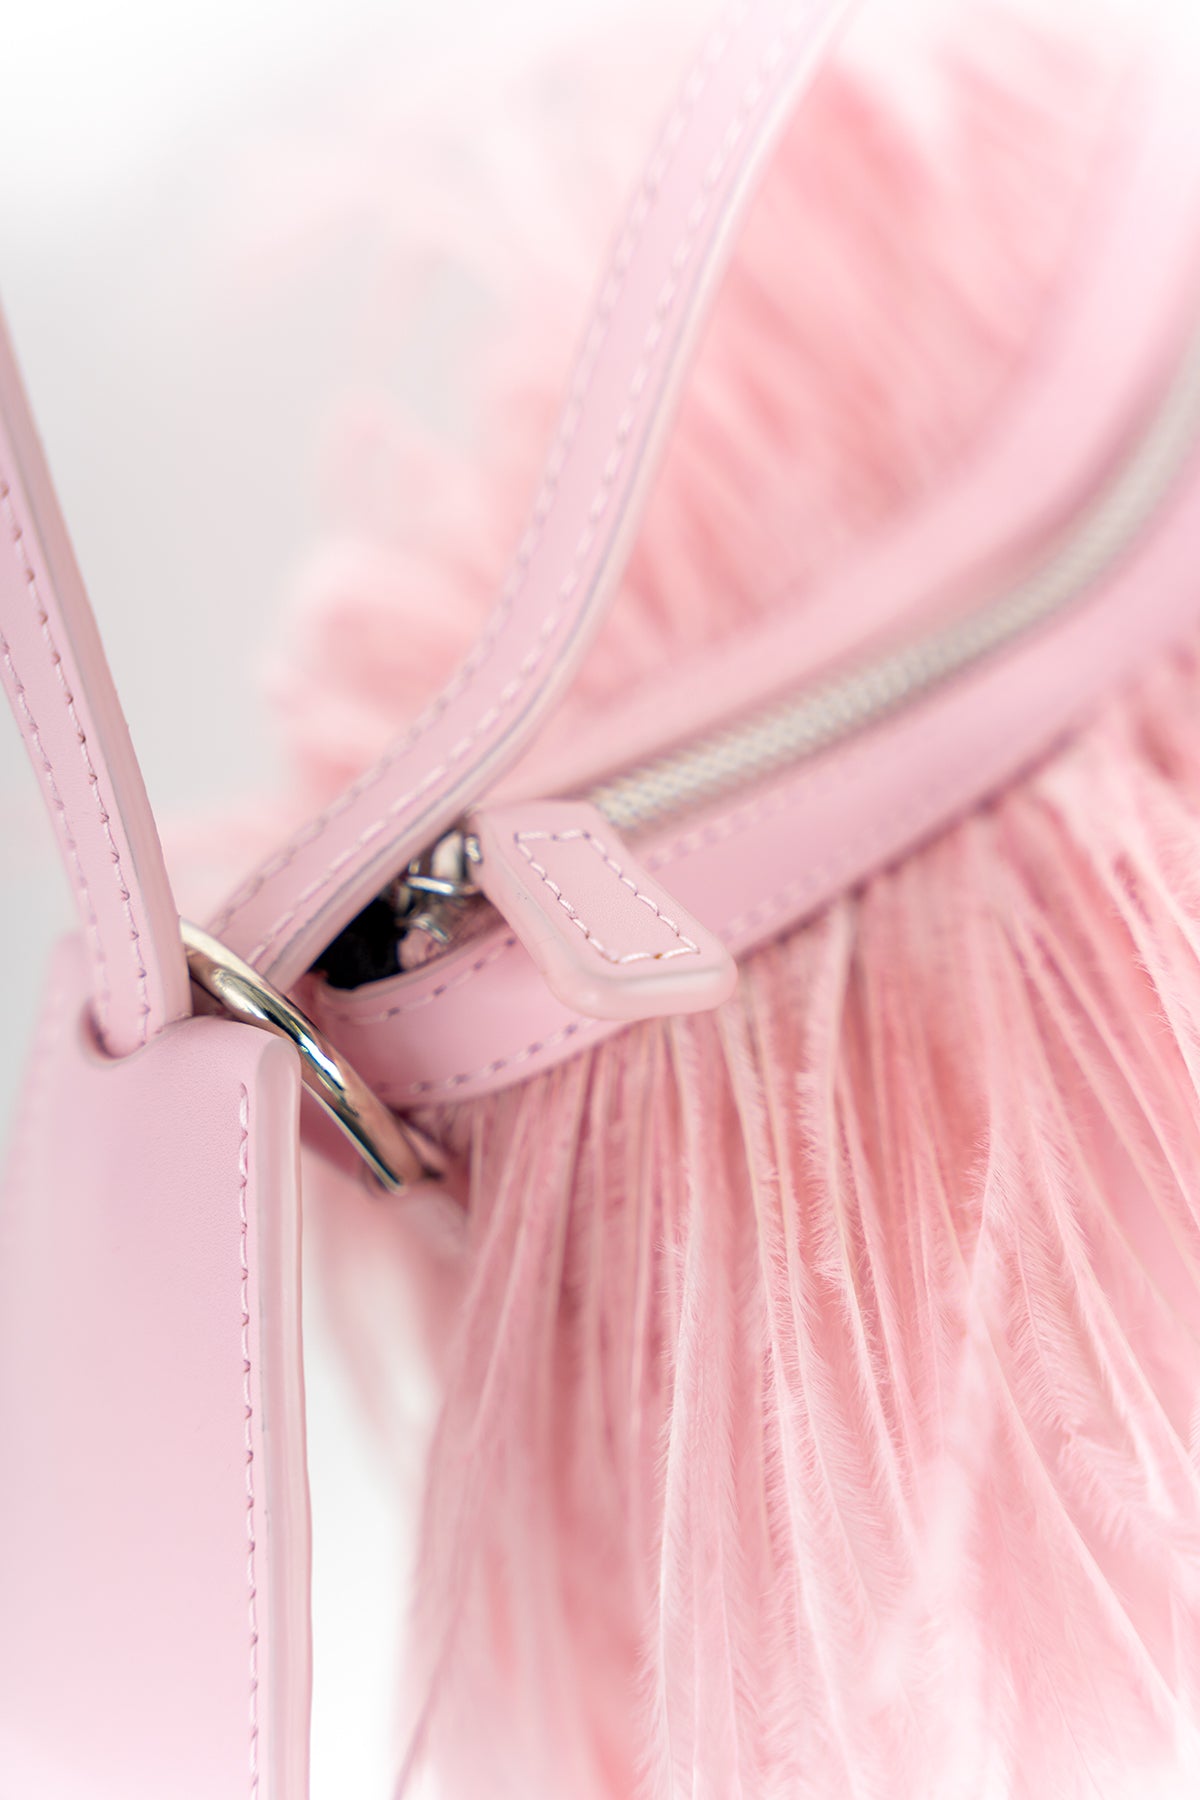 PINK FEATHER BAG